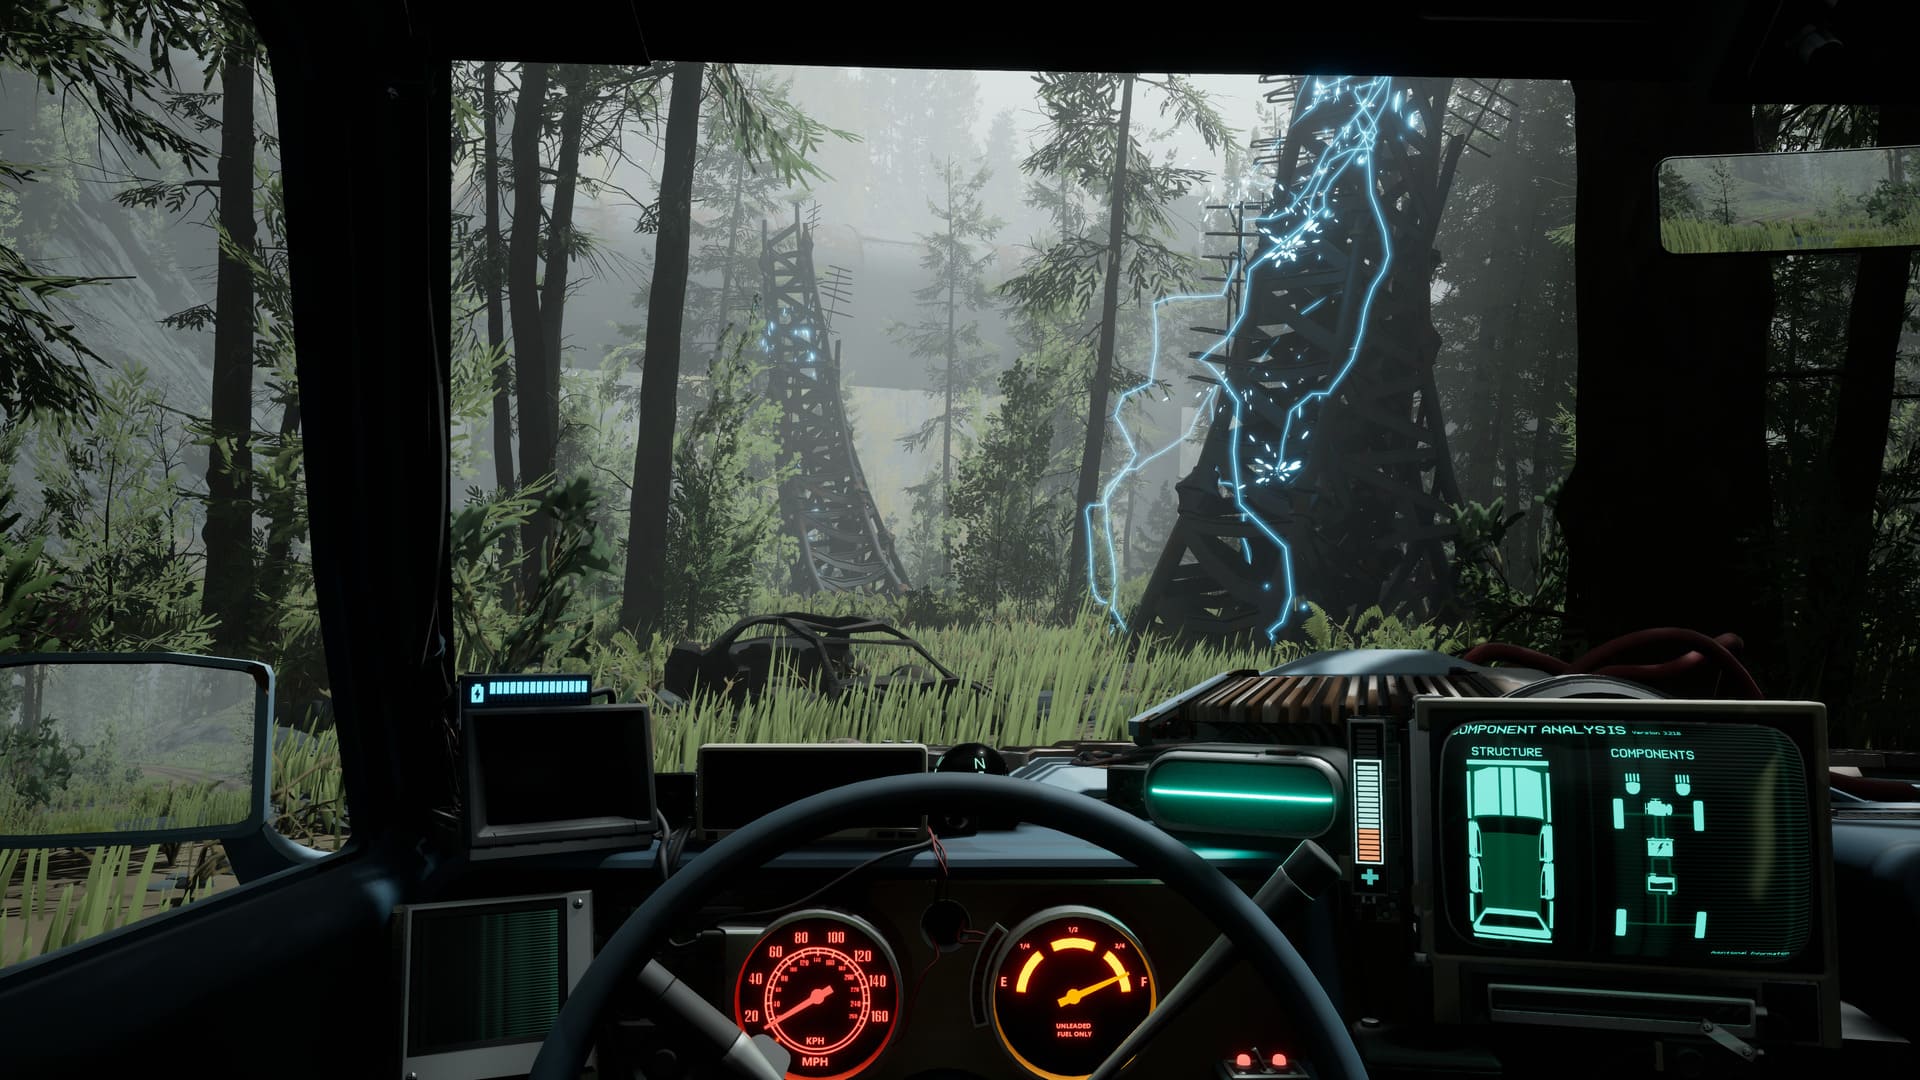 The player's view from the car in Pacific Drive, showcasing the steering wheel, car dashboard, and the Pacific Northwest forest beyond the windshield.